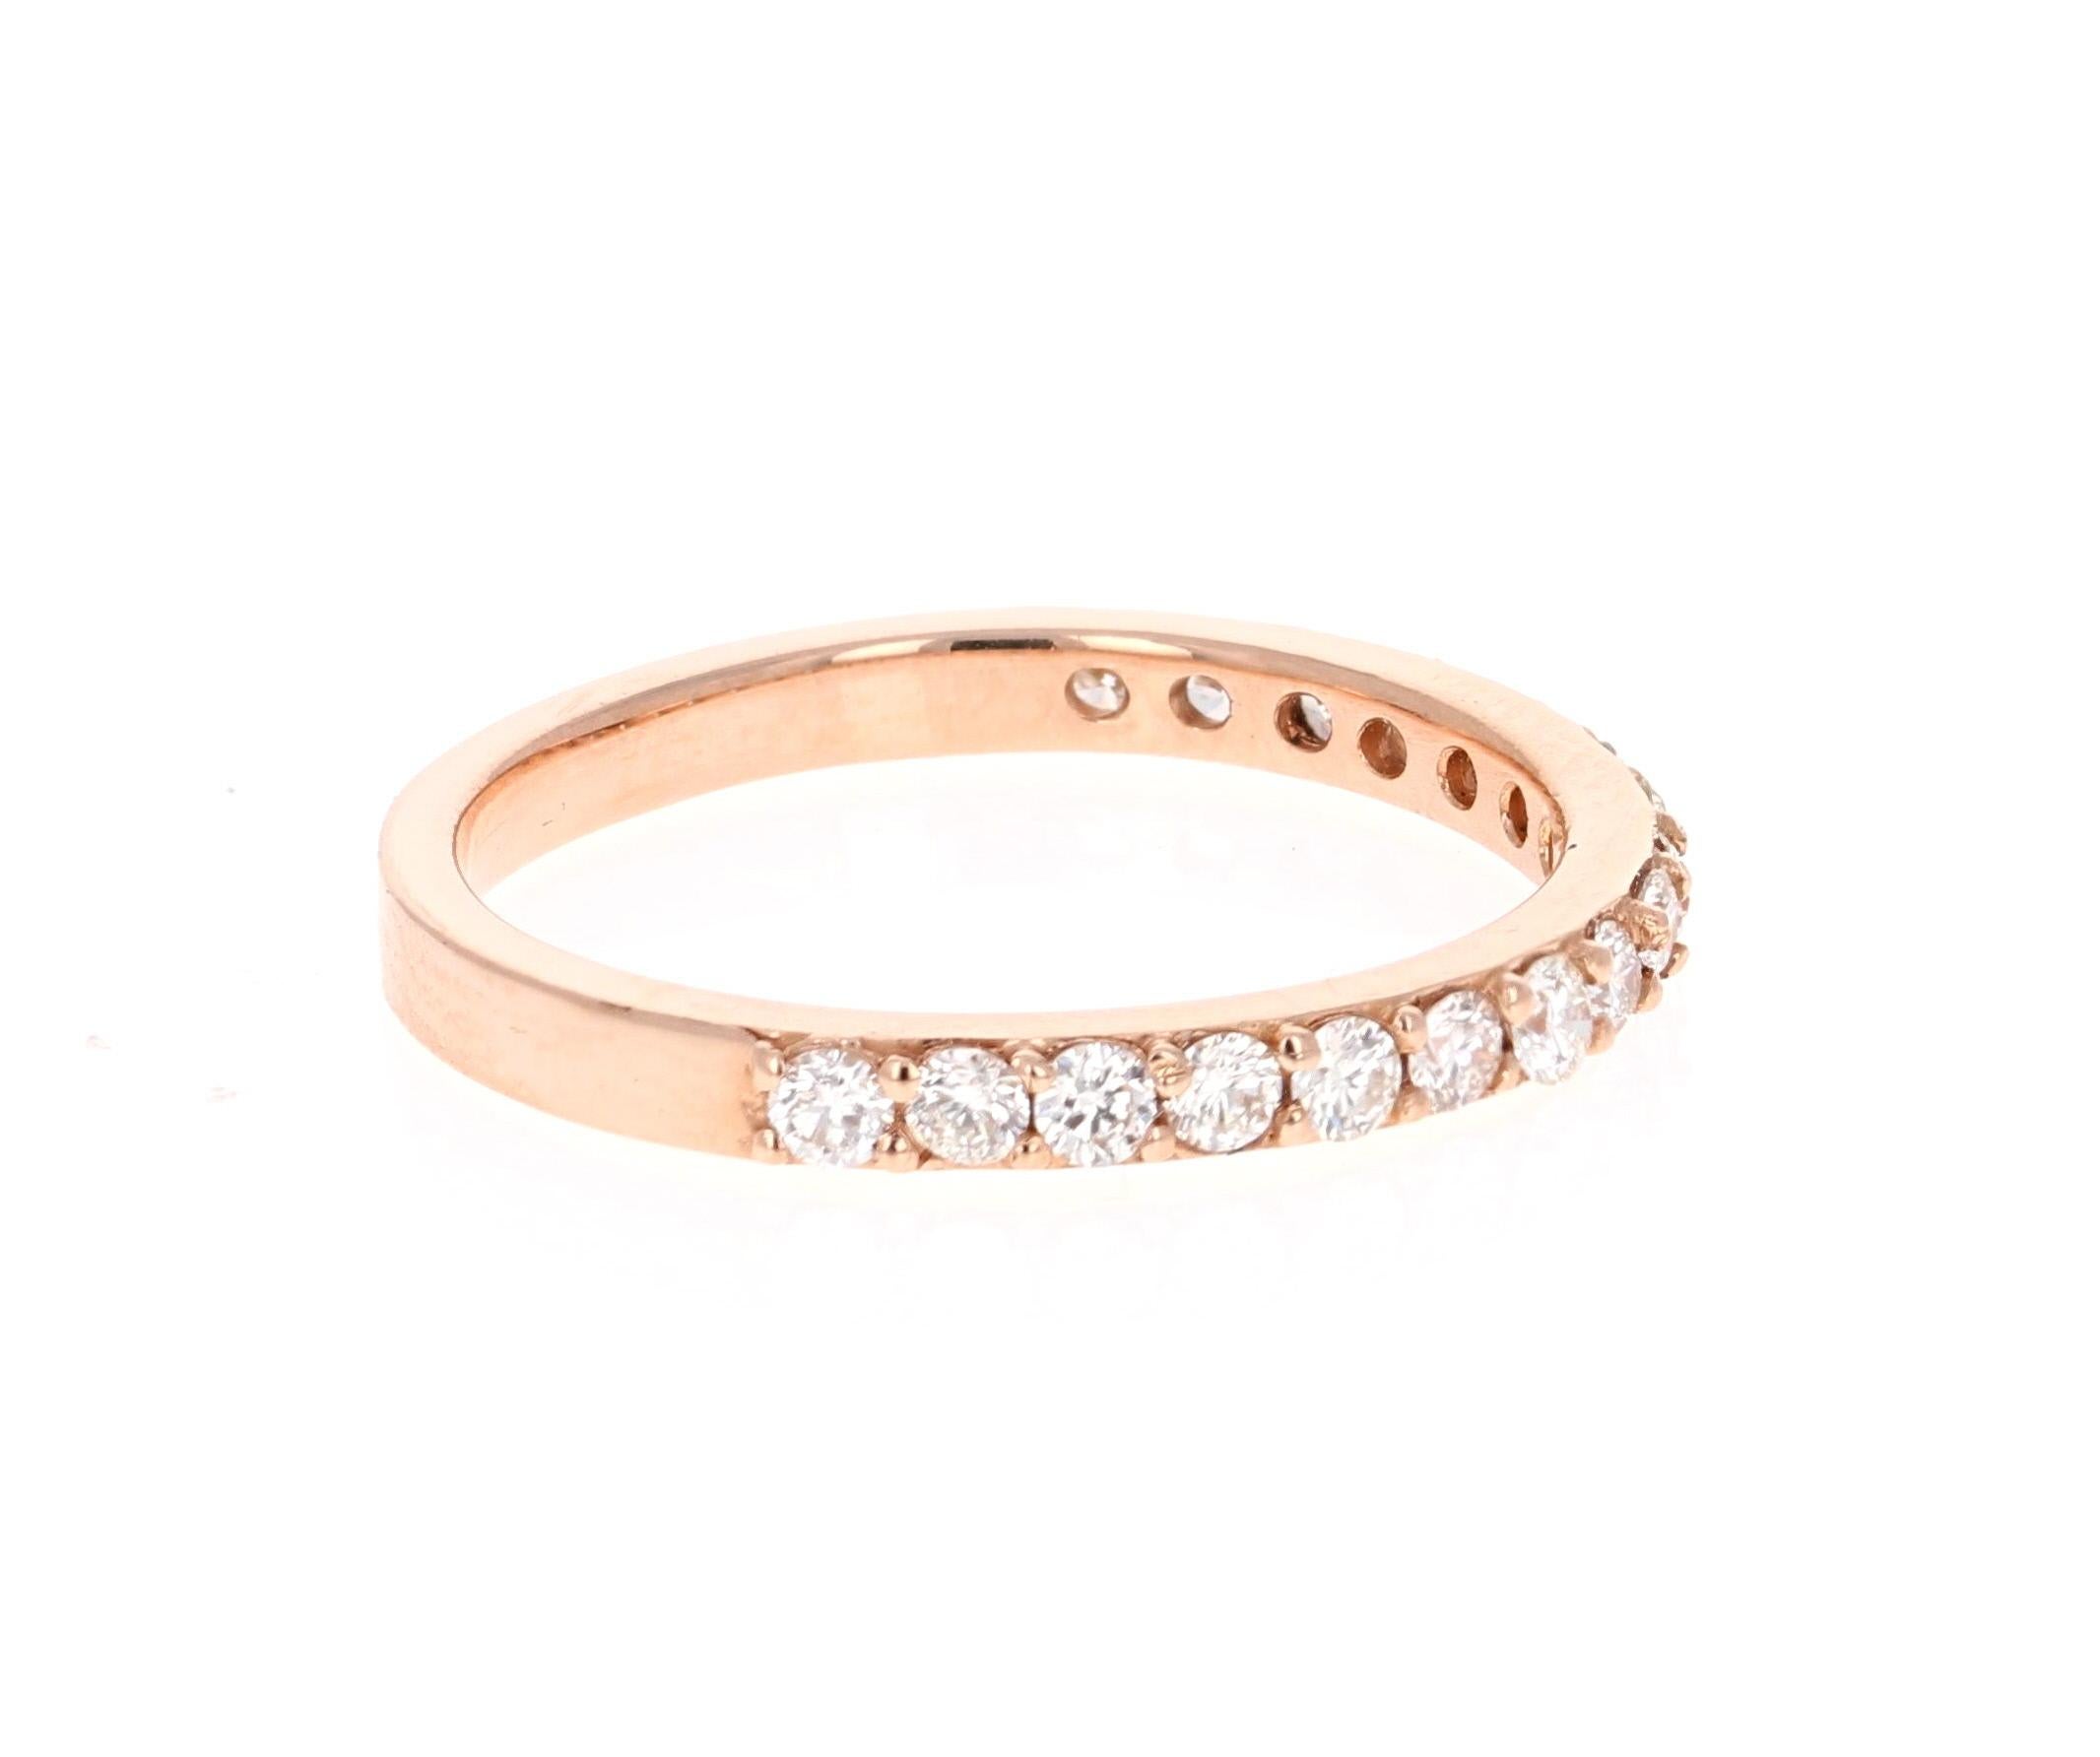 A beautiful band that can be worn as a single band or stack with other bands in other colors of Gold! 

This ring has 17 Round Cut Diamonds that weigh 0.51 Carats. The clarity and color of the diamonds are VS-H.

Crafted in 18 Karat Rose Gold and is